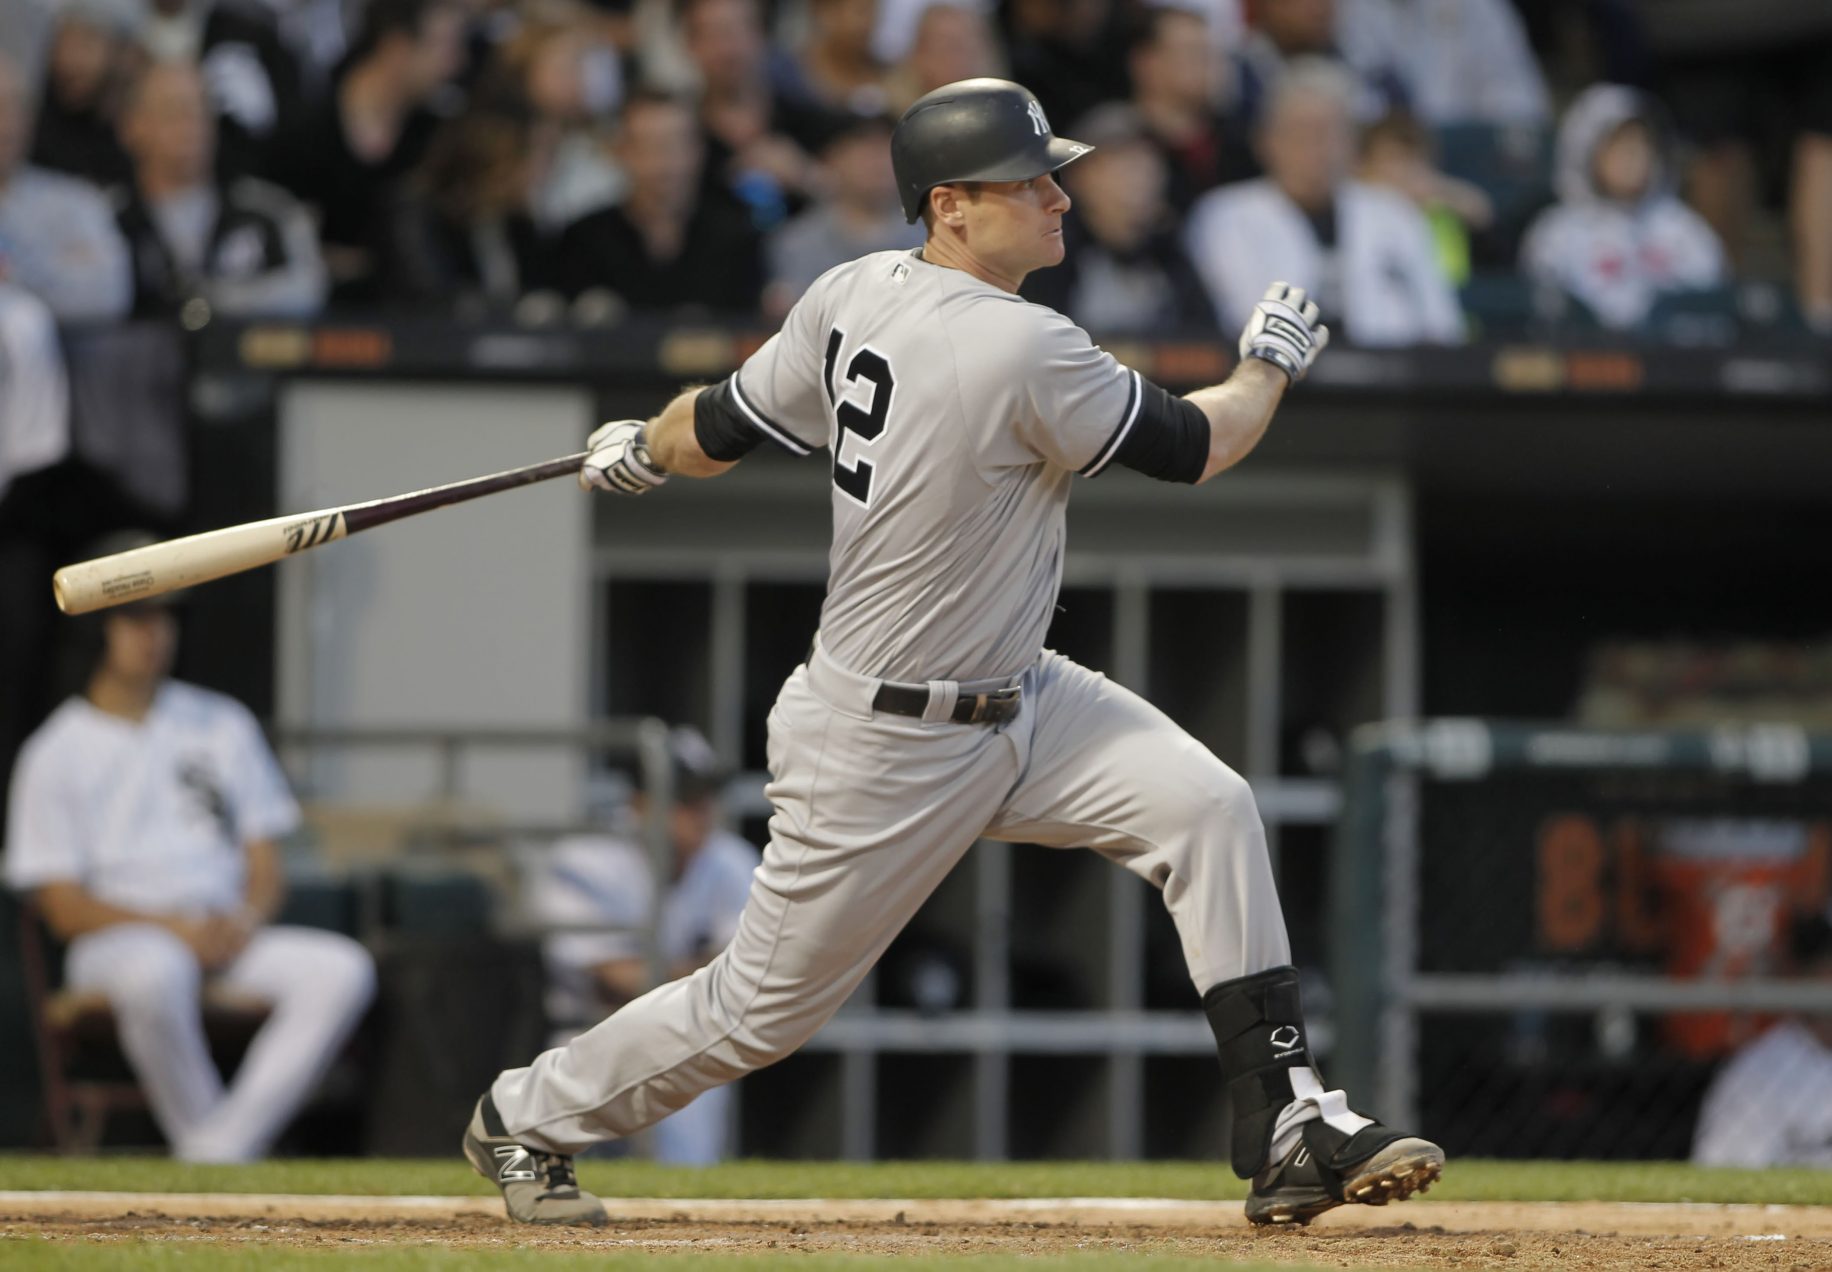 New York Yankees: Headley's Hot Streak Coming At The Right Time 